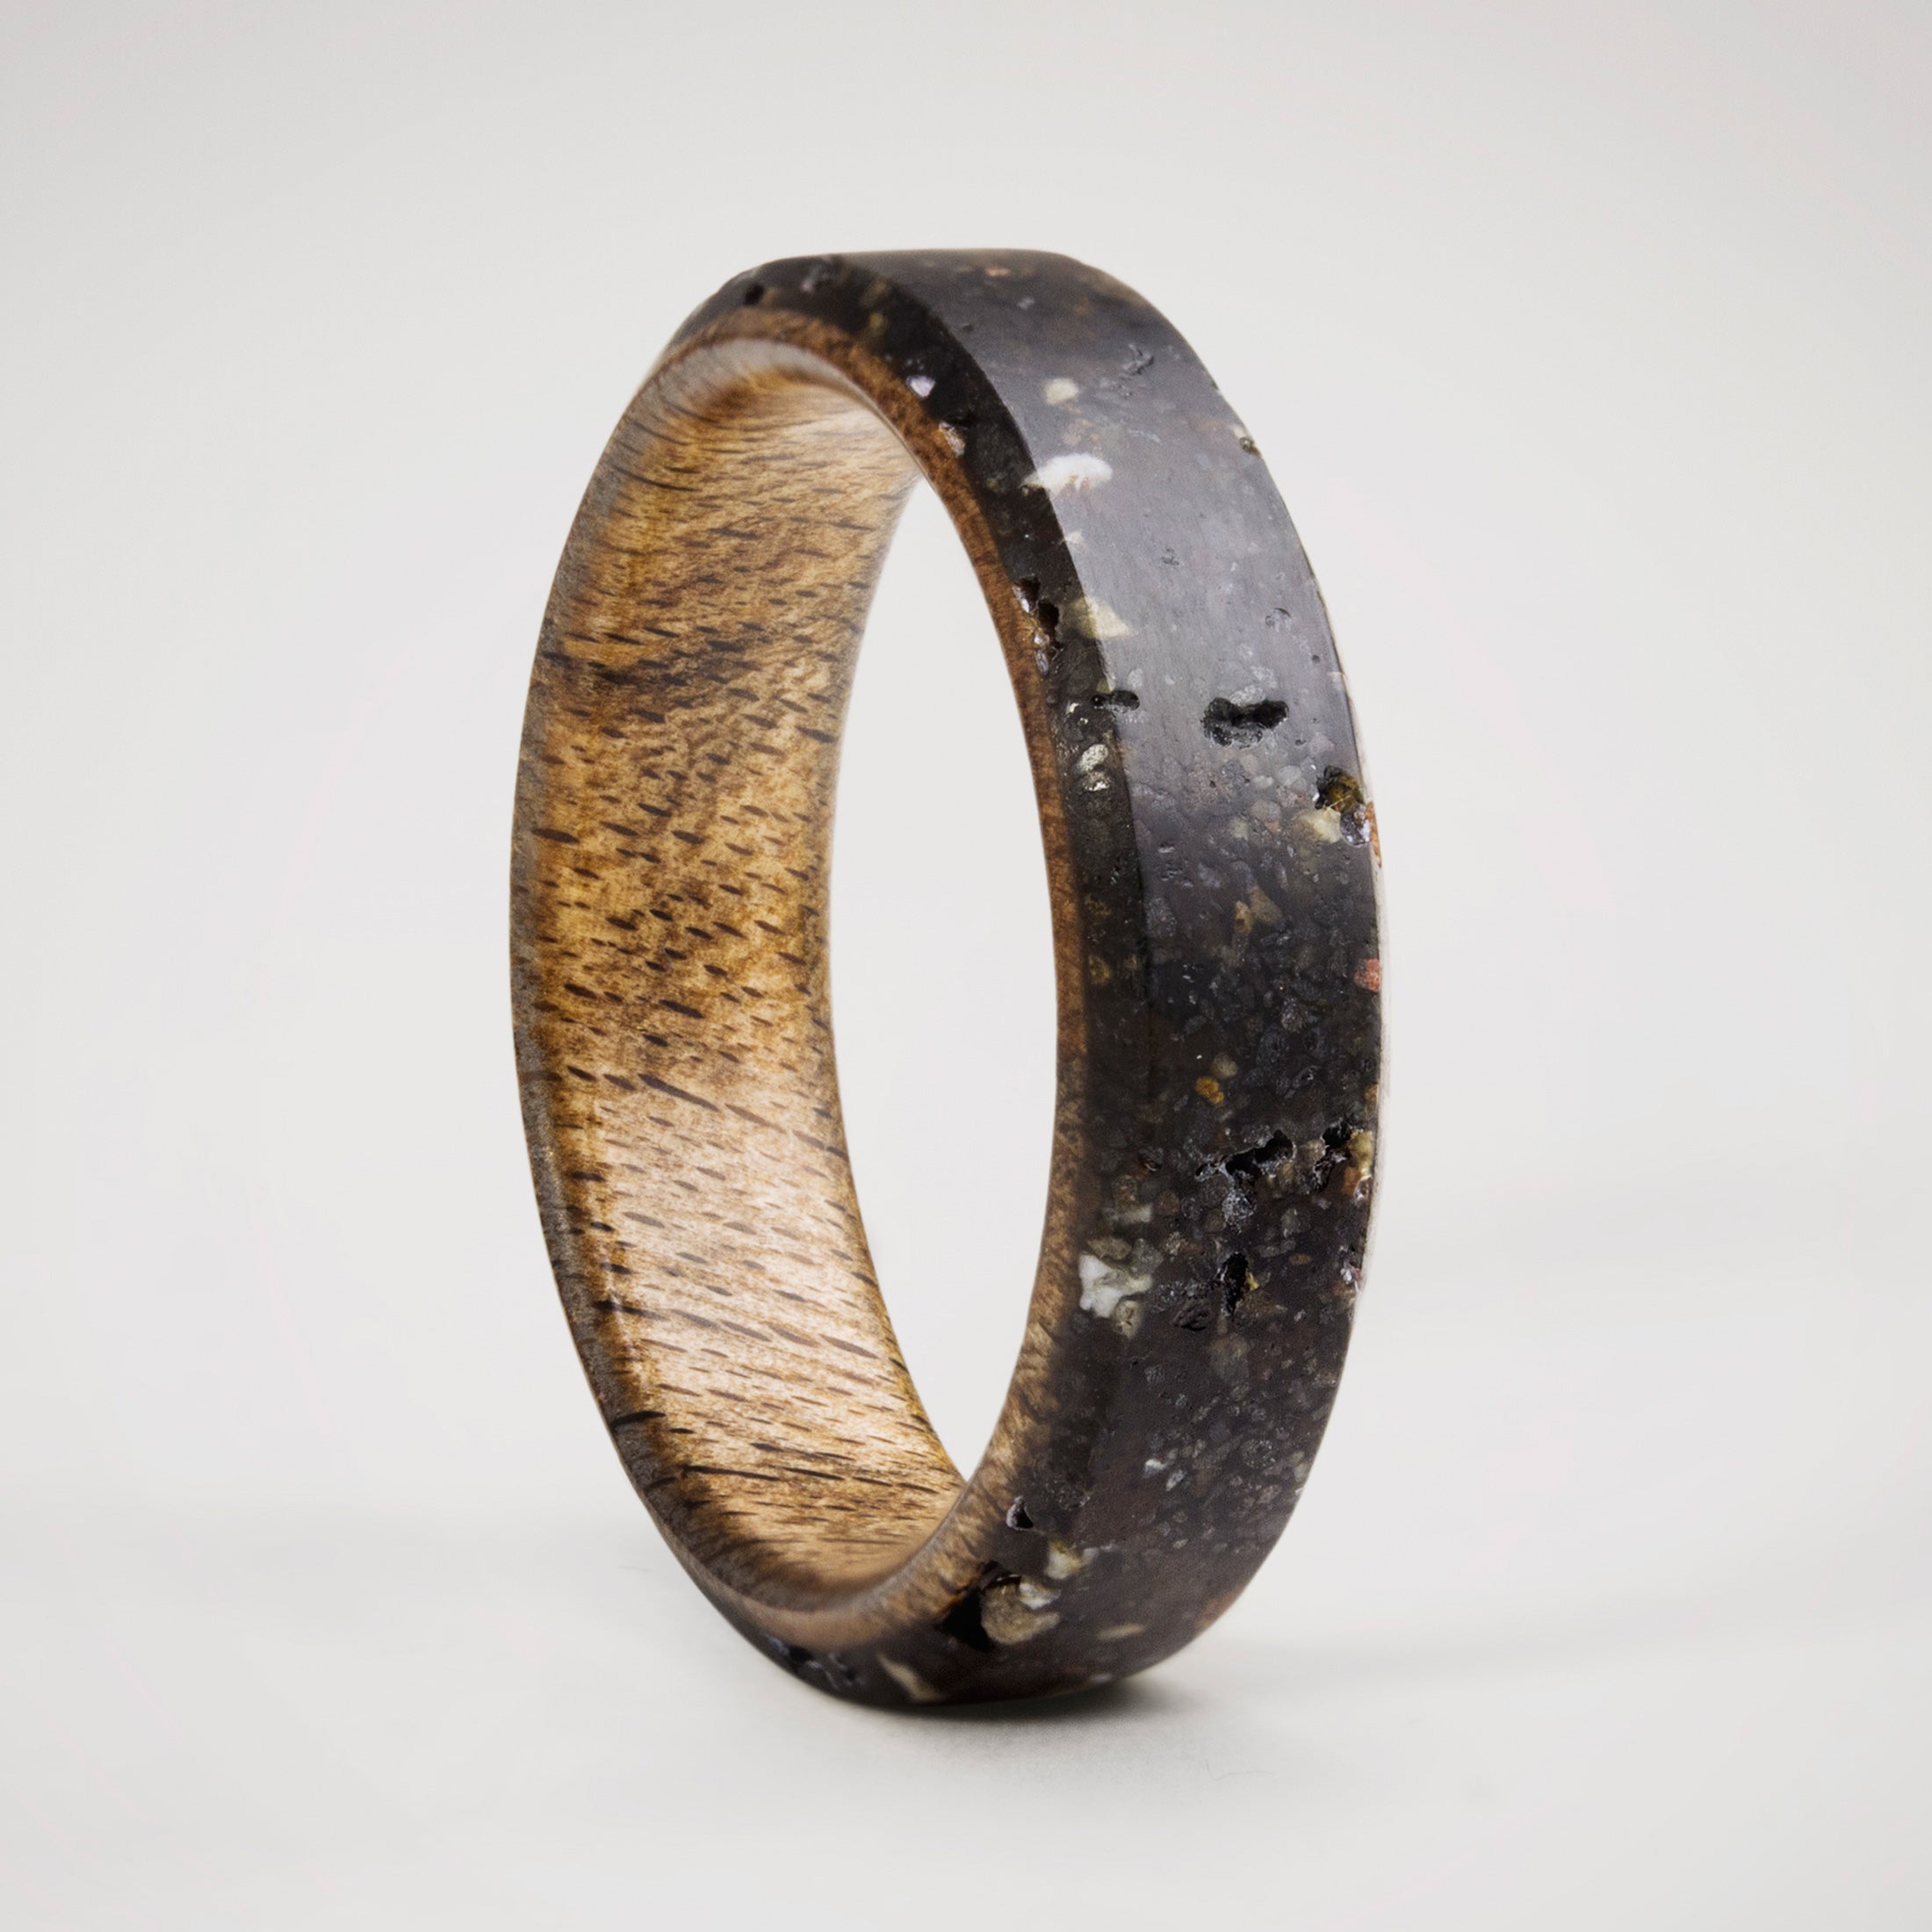 Patagonic Stone and wood ring